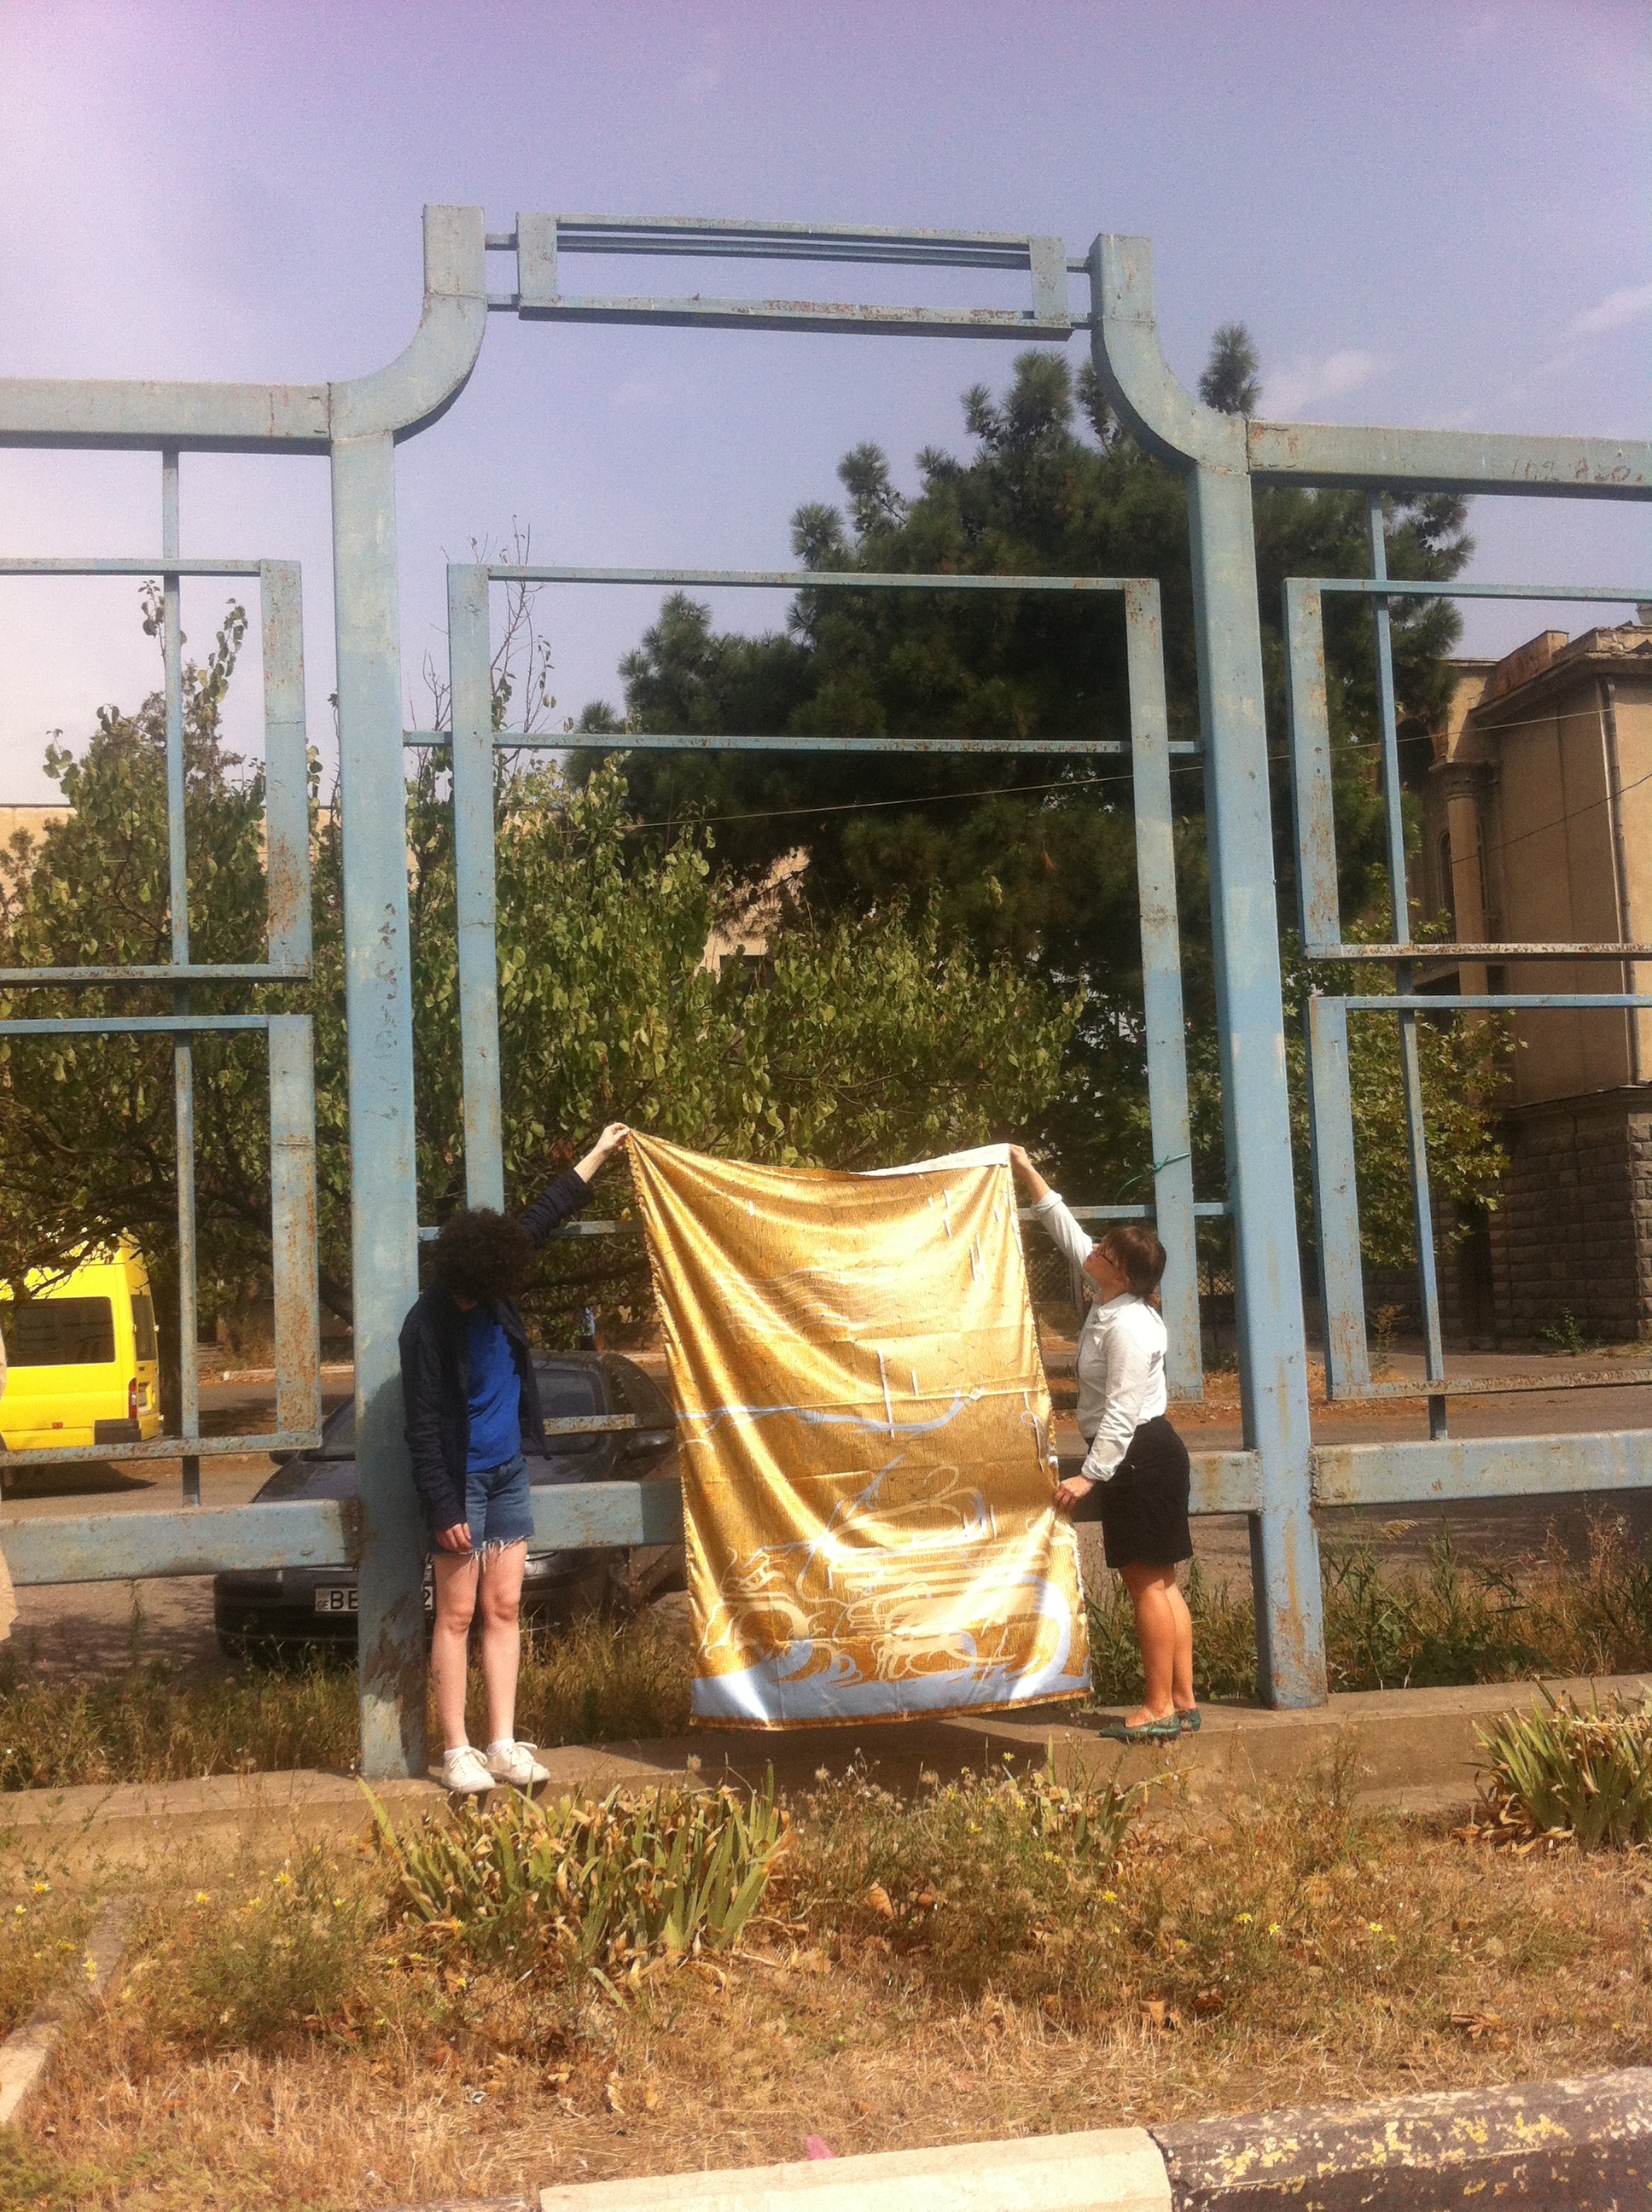  Flag of Convenience, 2015, Digitally printed satin shown within the work of Ash Kilmartin in  124,908 , Curated by Tara McDowell, part of  SOS - Self Organised Systems , the 2nd Tbilisi Triennial. Rustavi, Georgia. 